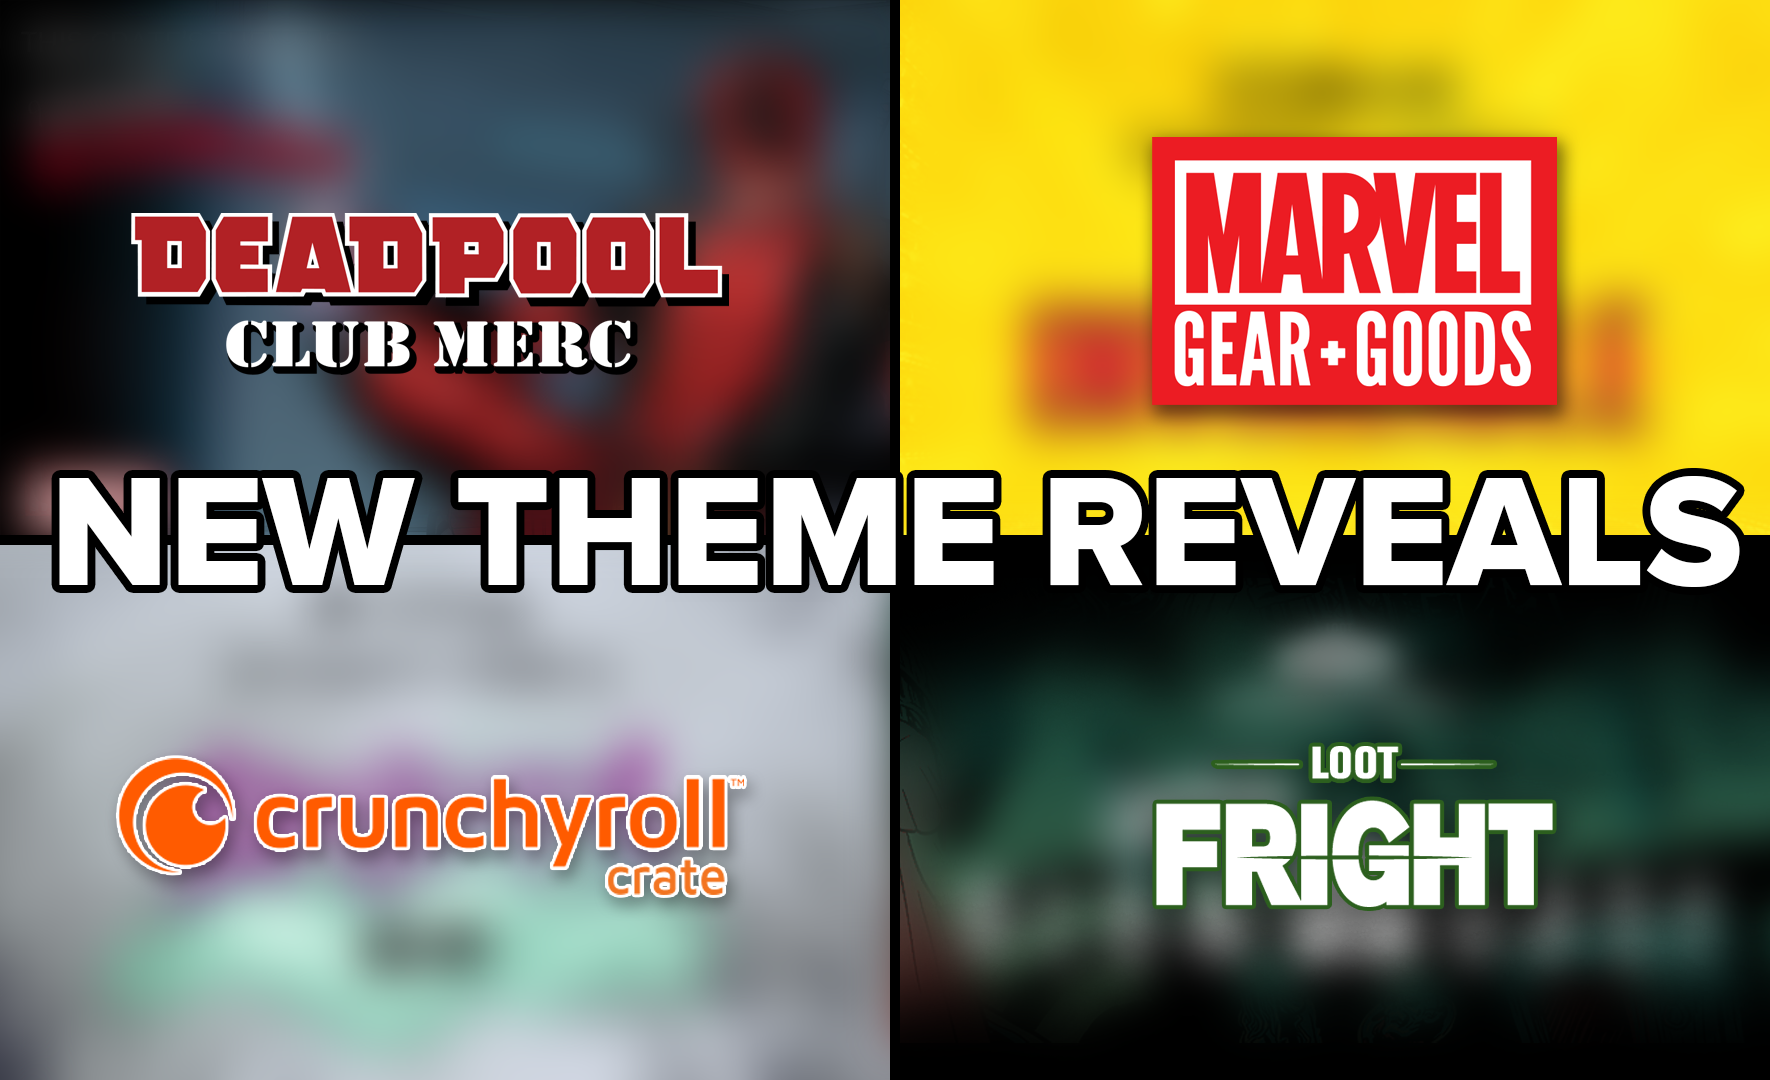 The Daily Crate | THEME REVEAL: New Marvel, Deadpool, Crunchyroll, and Fright Exclusives!